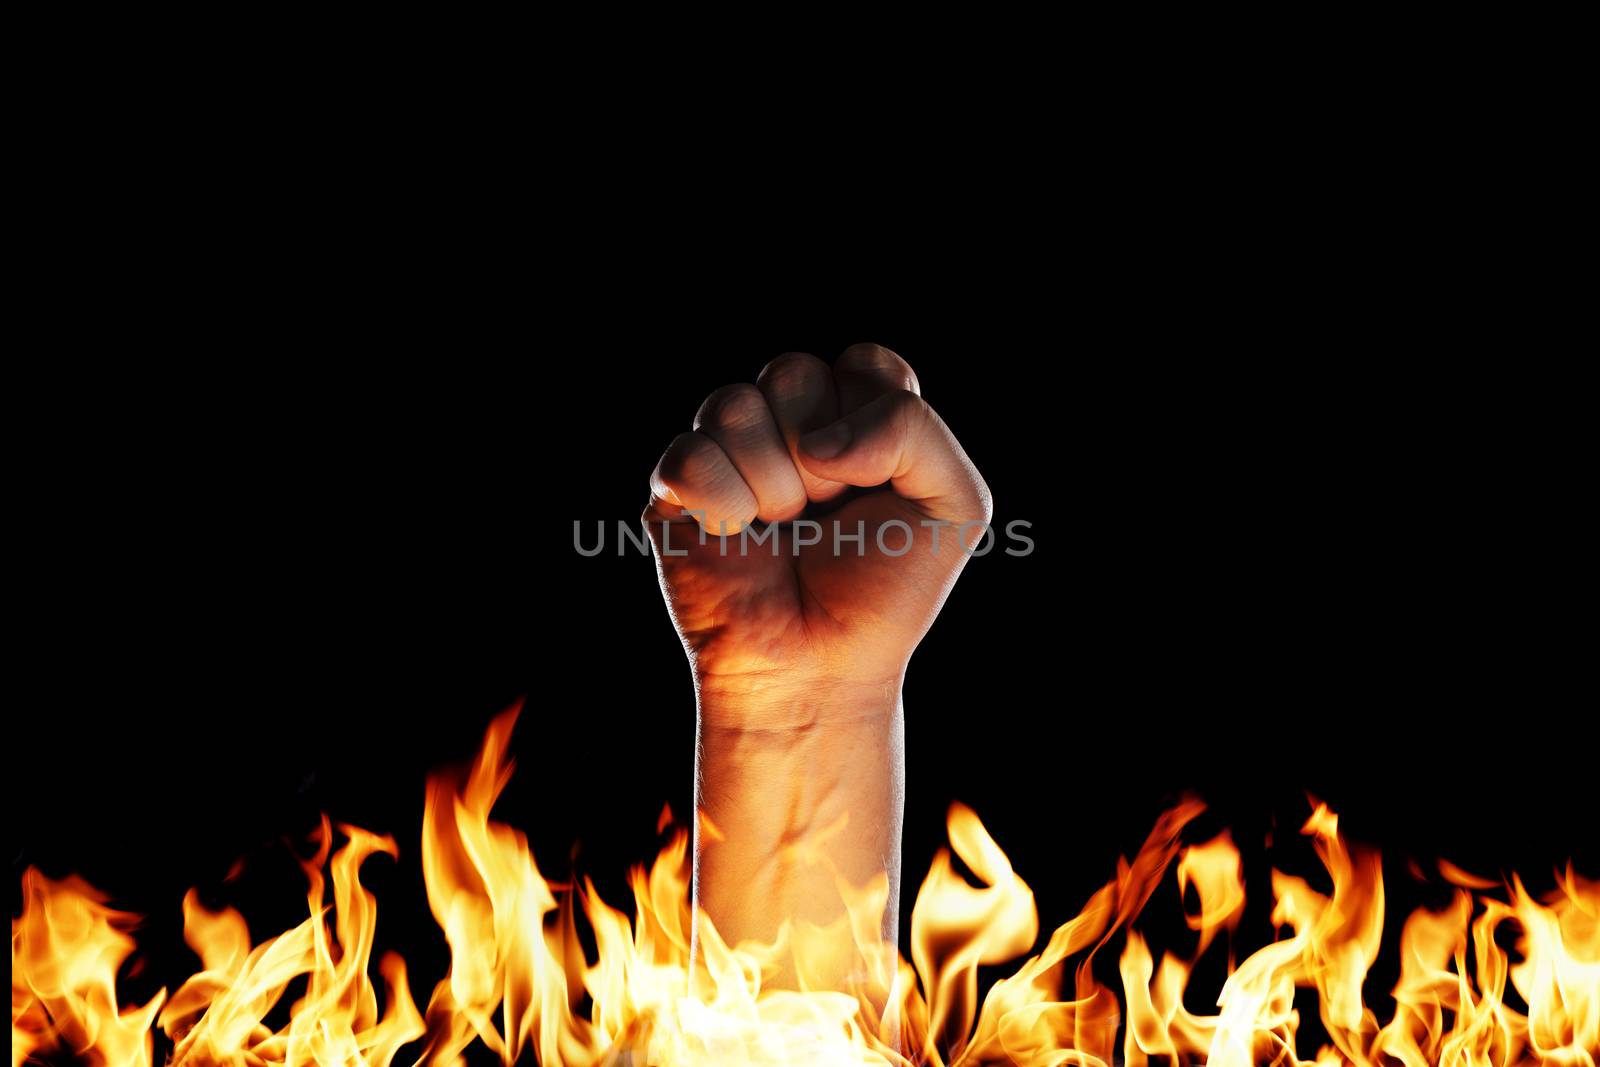 Hand in a fist emerging from a sea of fire.